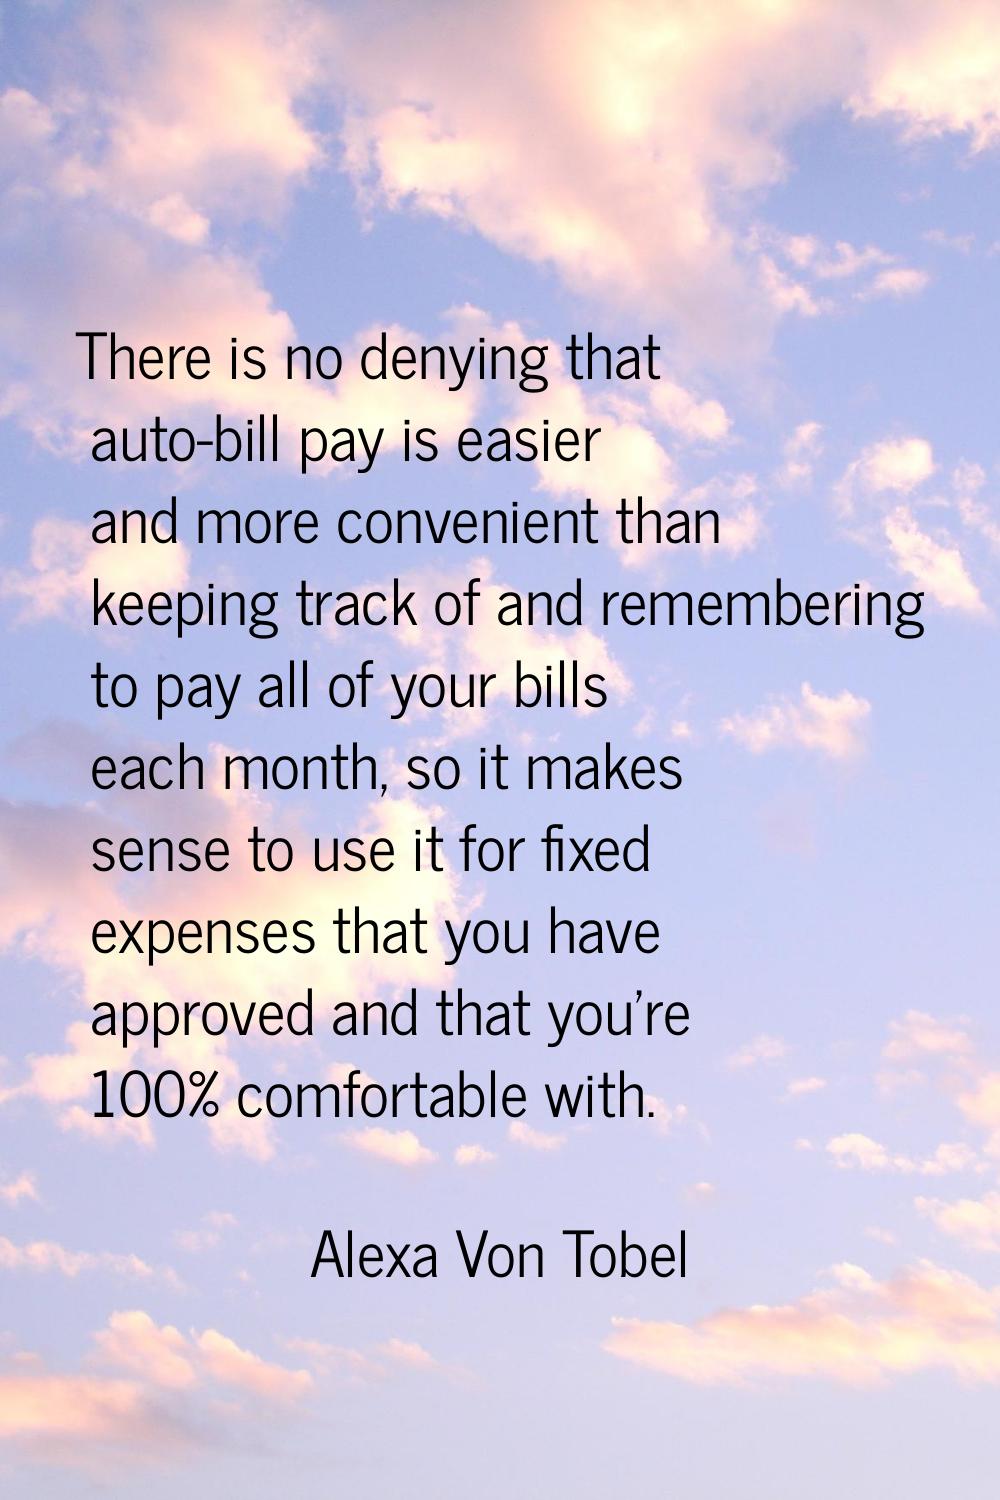 There is no denying that auto-bill pay is easier and more convenient than keeping track of and reme